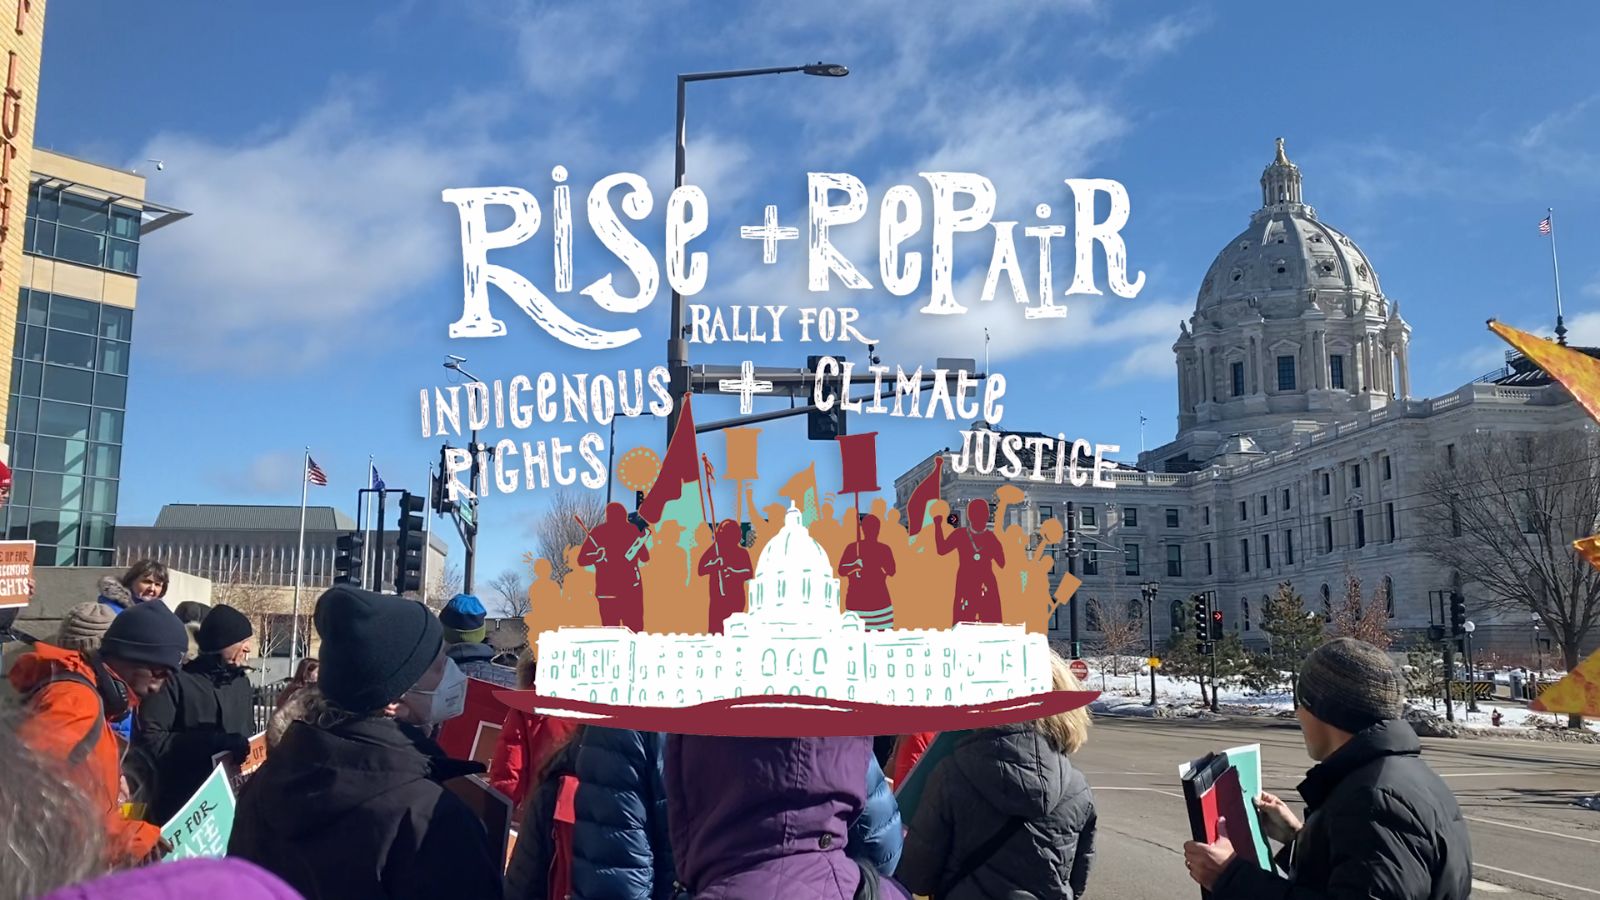 People marching to the Minnesota state capitol with the text "Rise + Repair Rally for Indigenous Rights + Climate Justice"